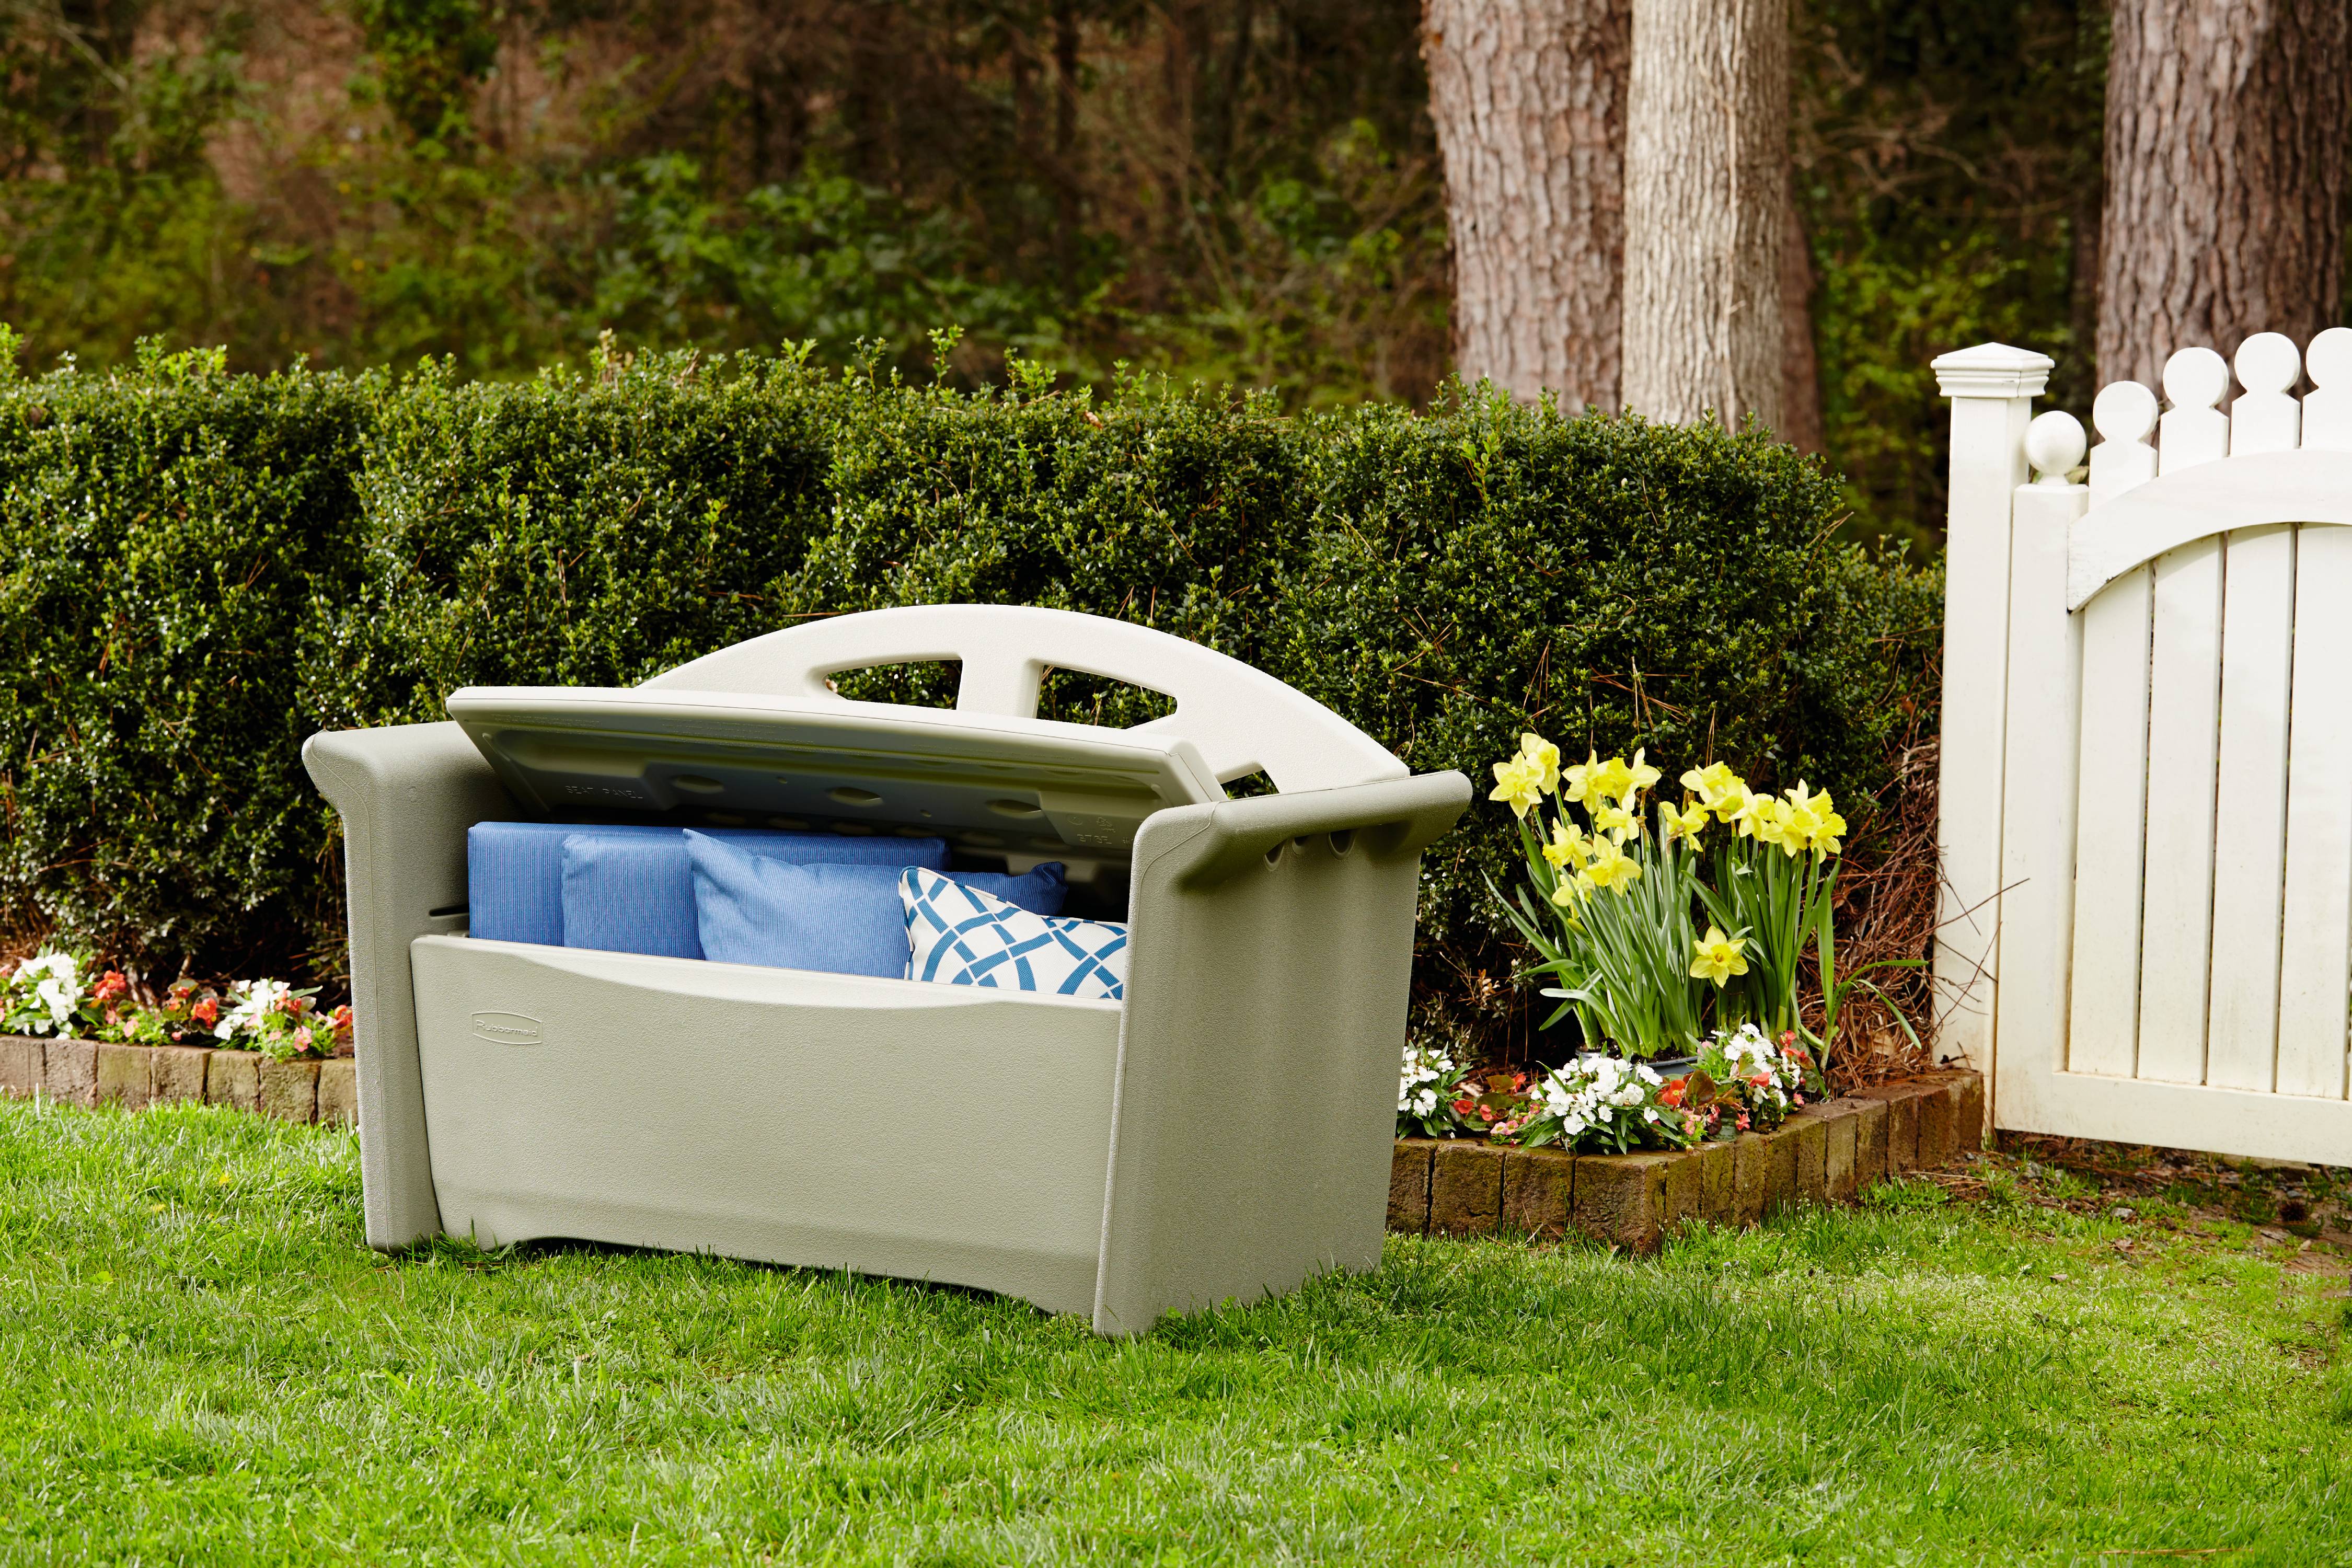 Rubbermaid Outdoor Patio Storage Bench, Resin, Olive & Sandstone - image 5 of 5